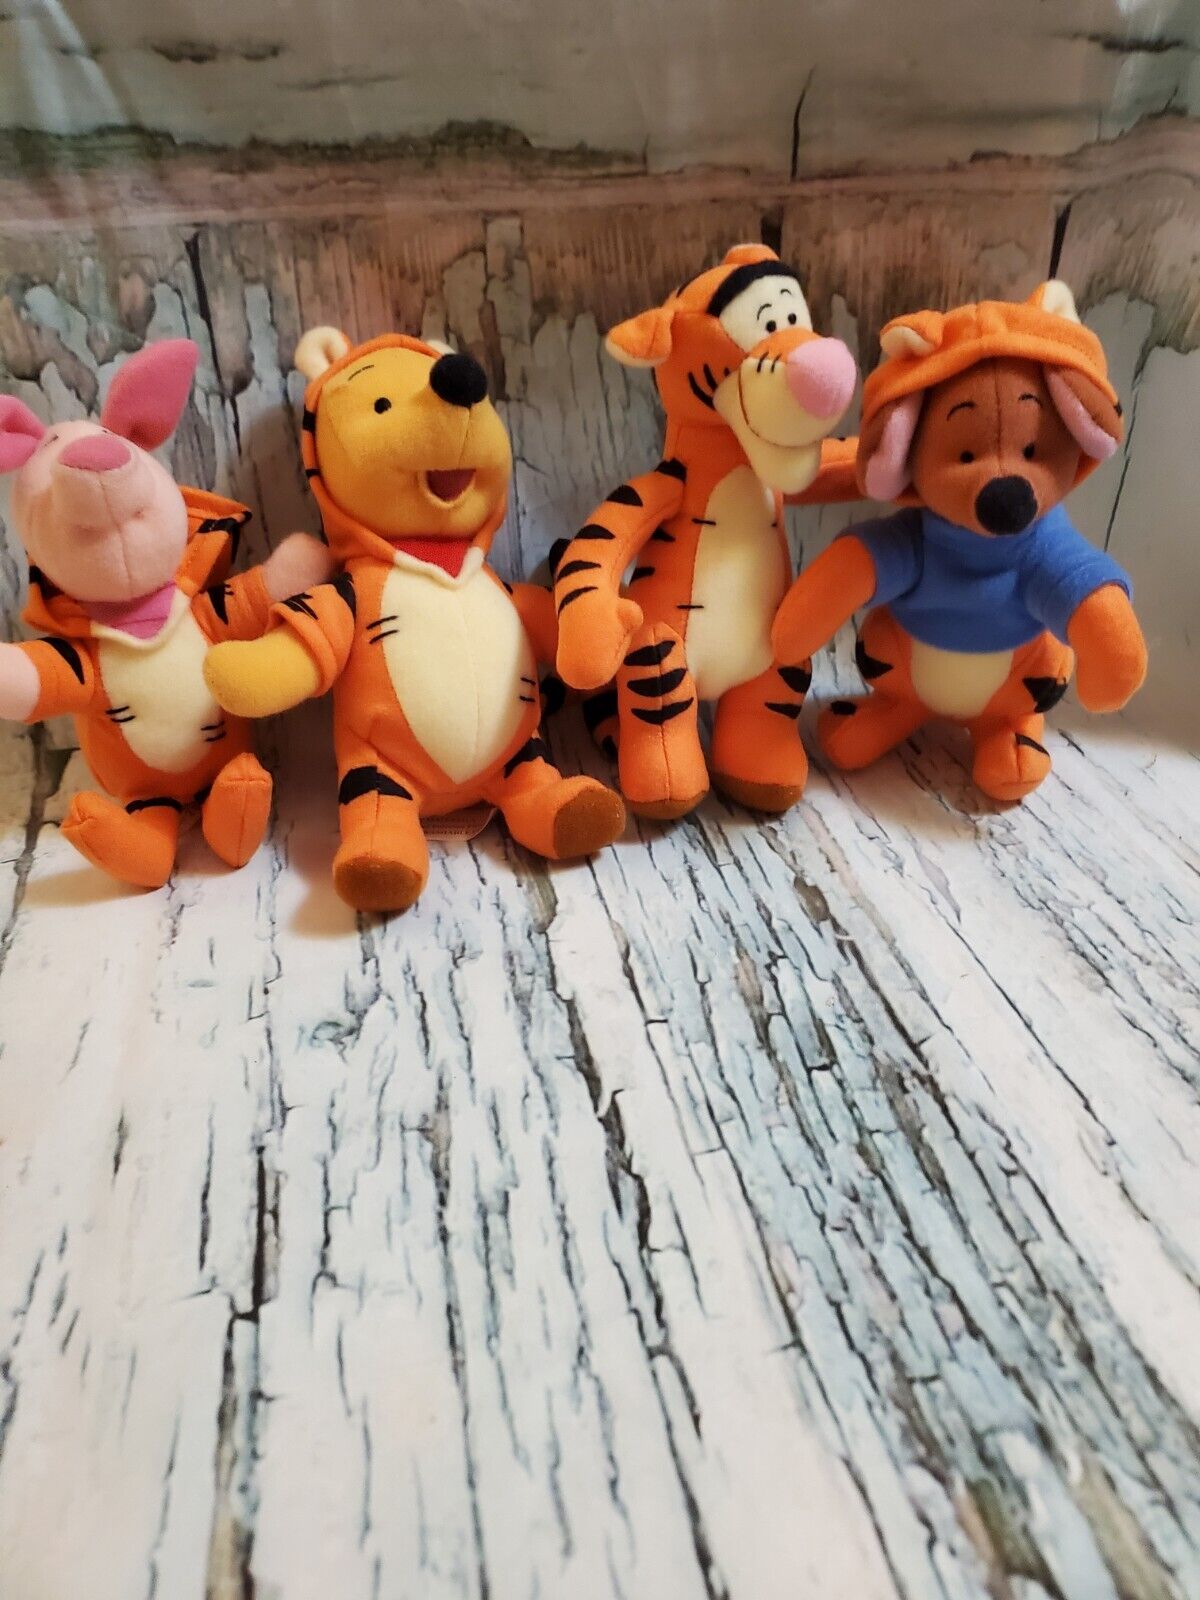 4 Stuffed Characters From Winnie The Pooh